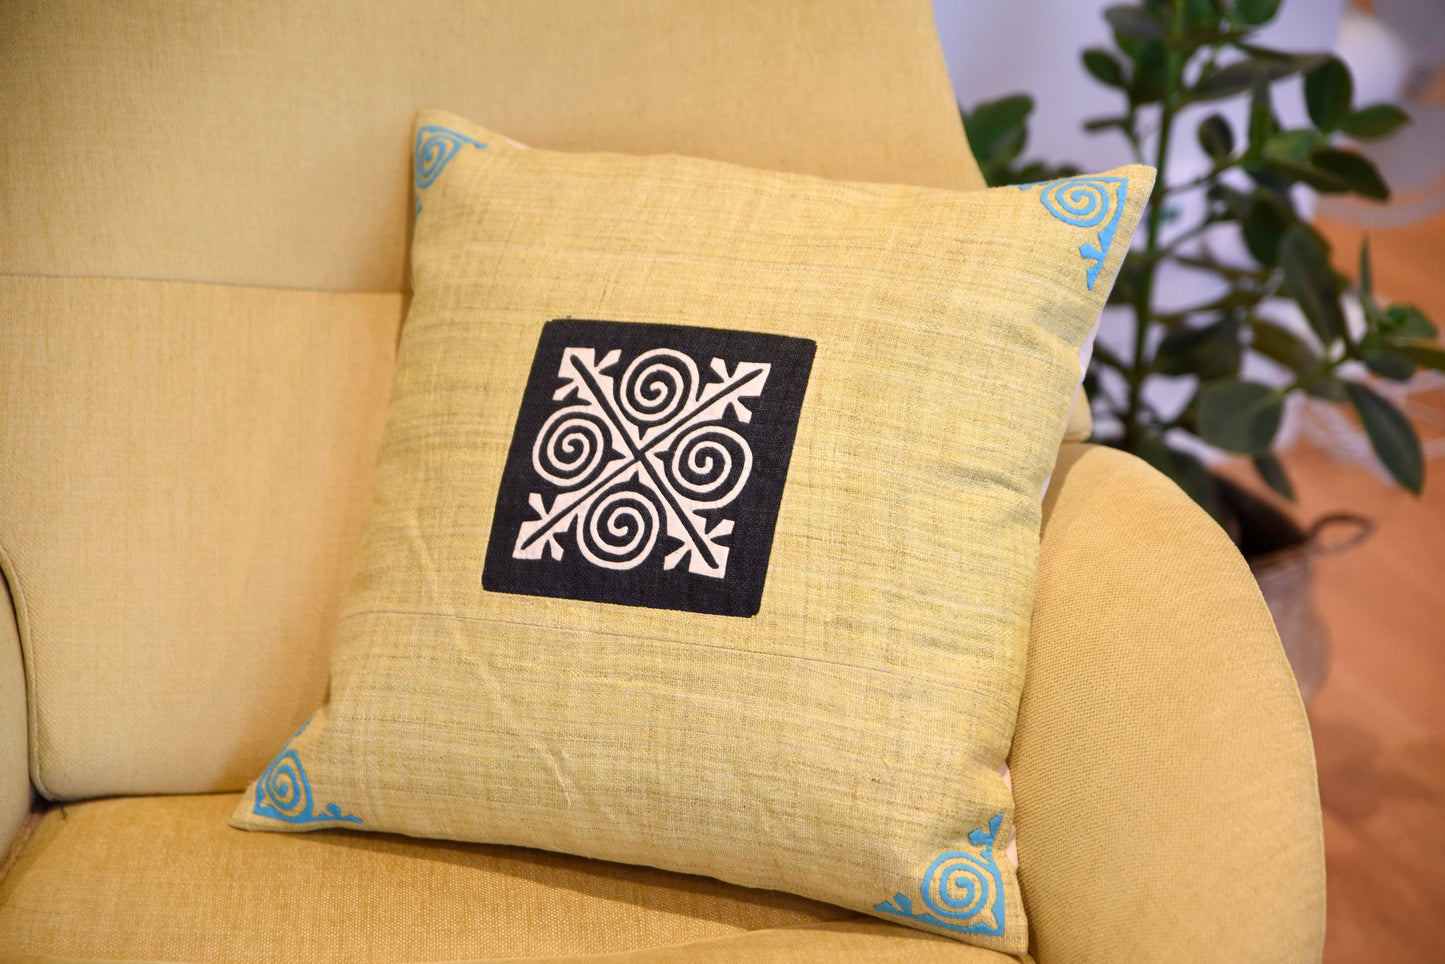 Hemp Yellow Cushion Cover, embroidered corners, black and white hand-embroidered patch